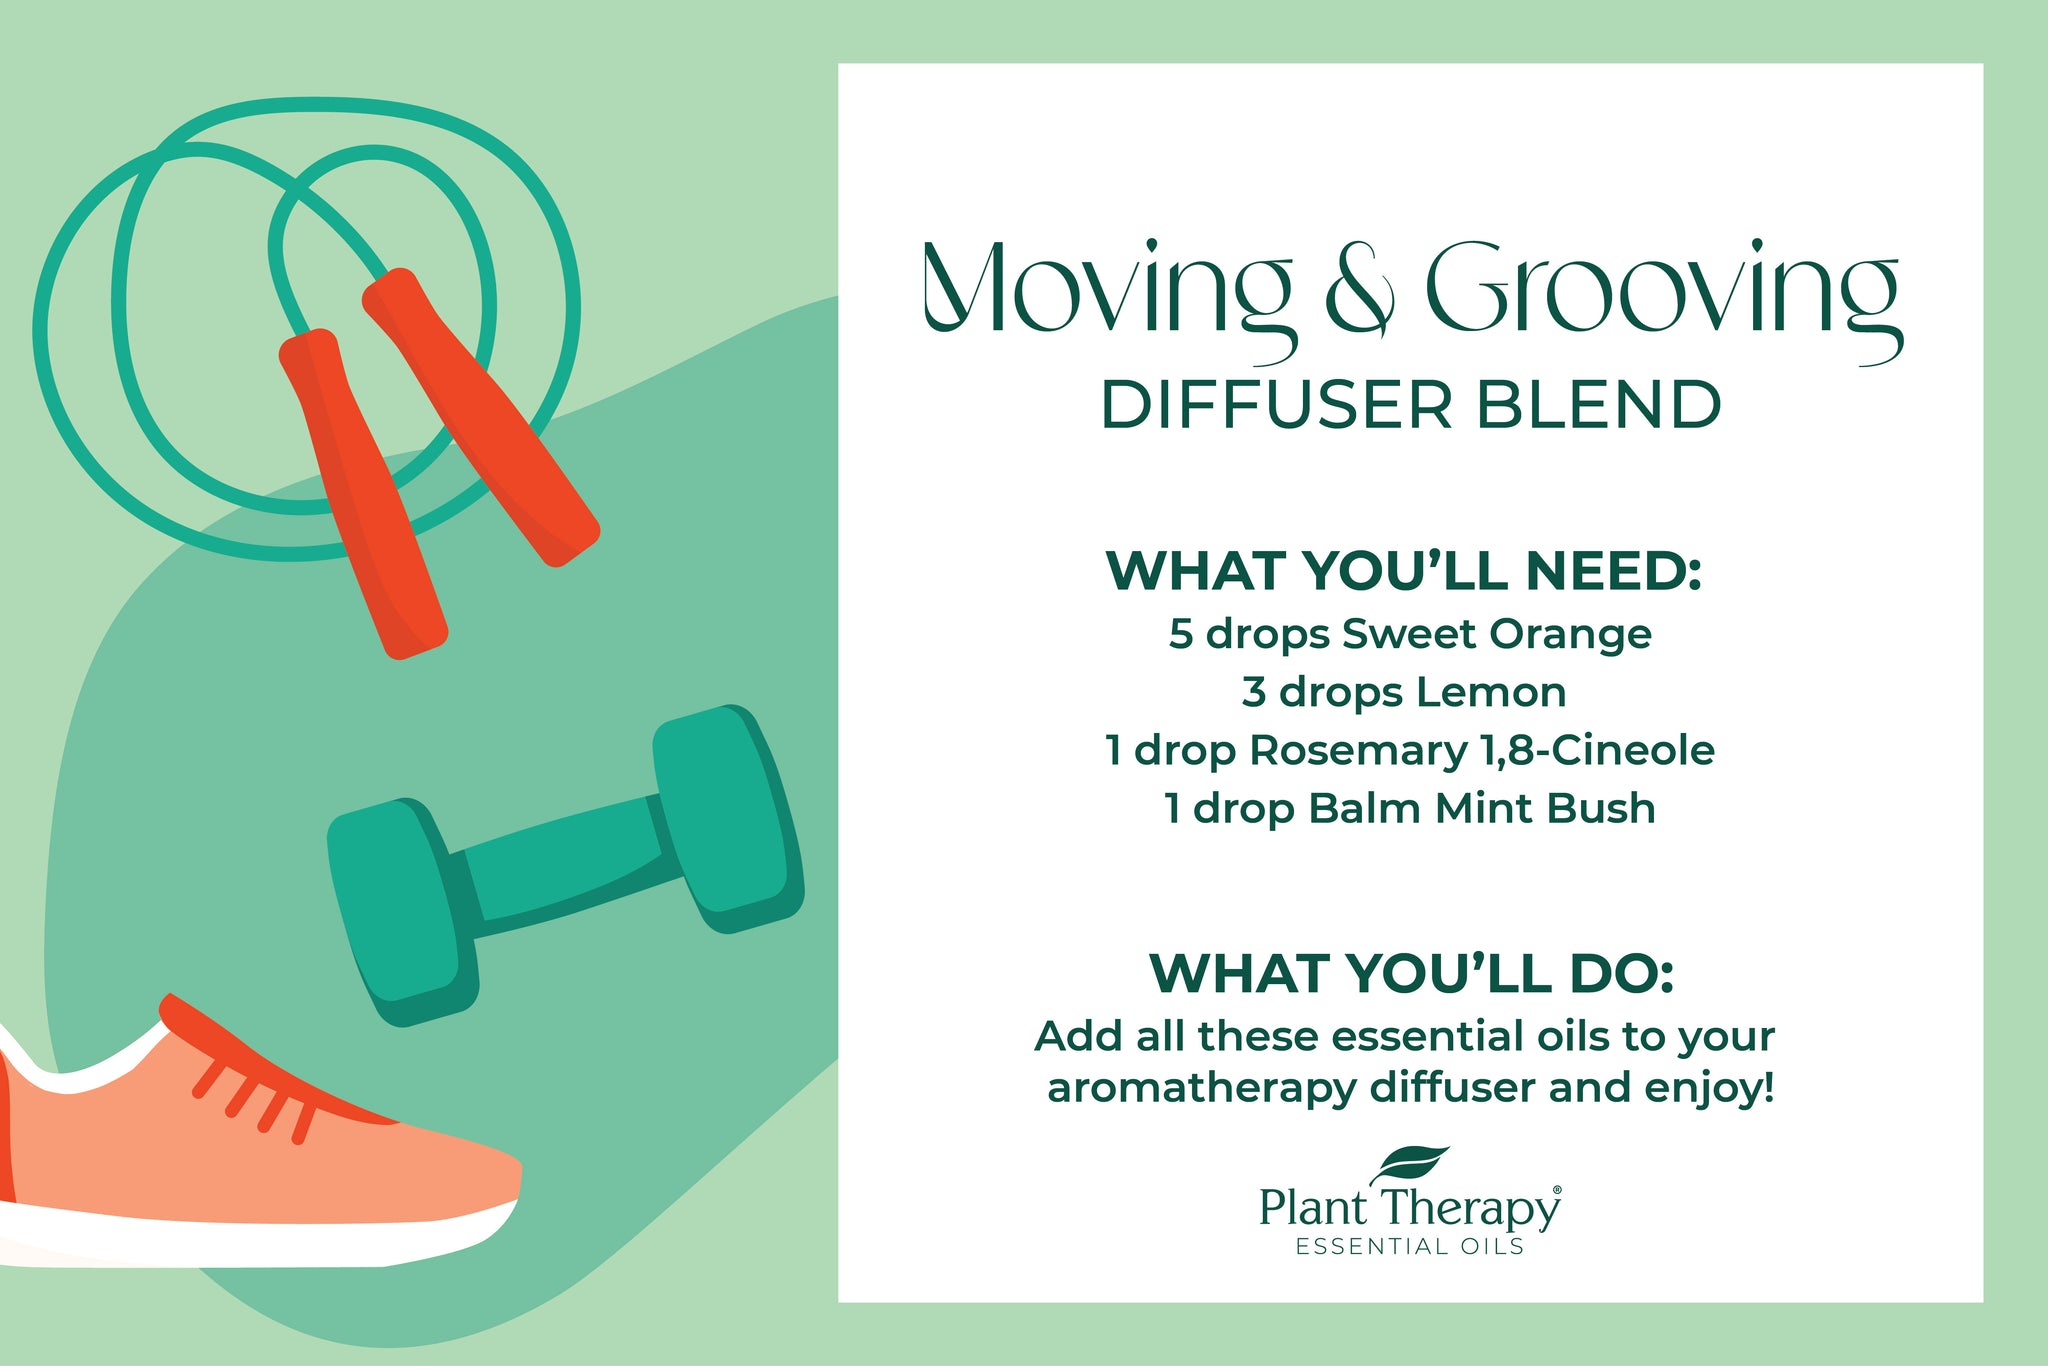 Moving & Grooving Diffuser Blend